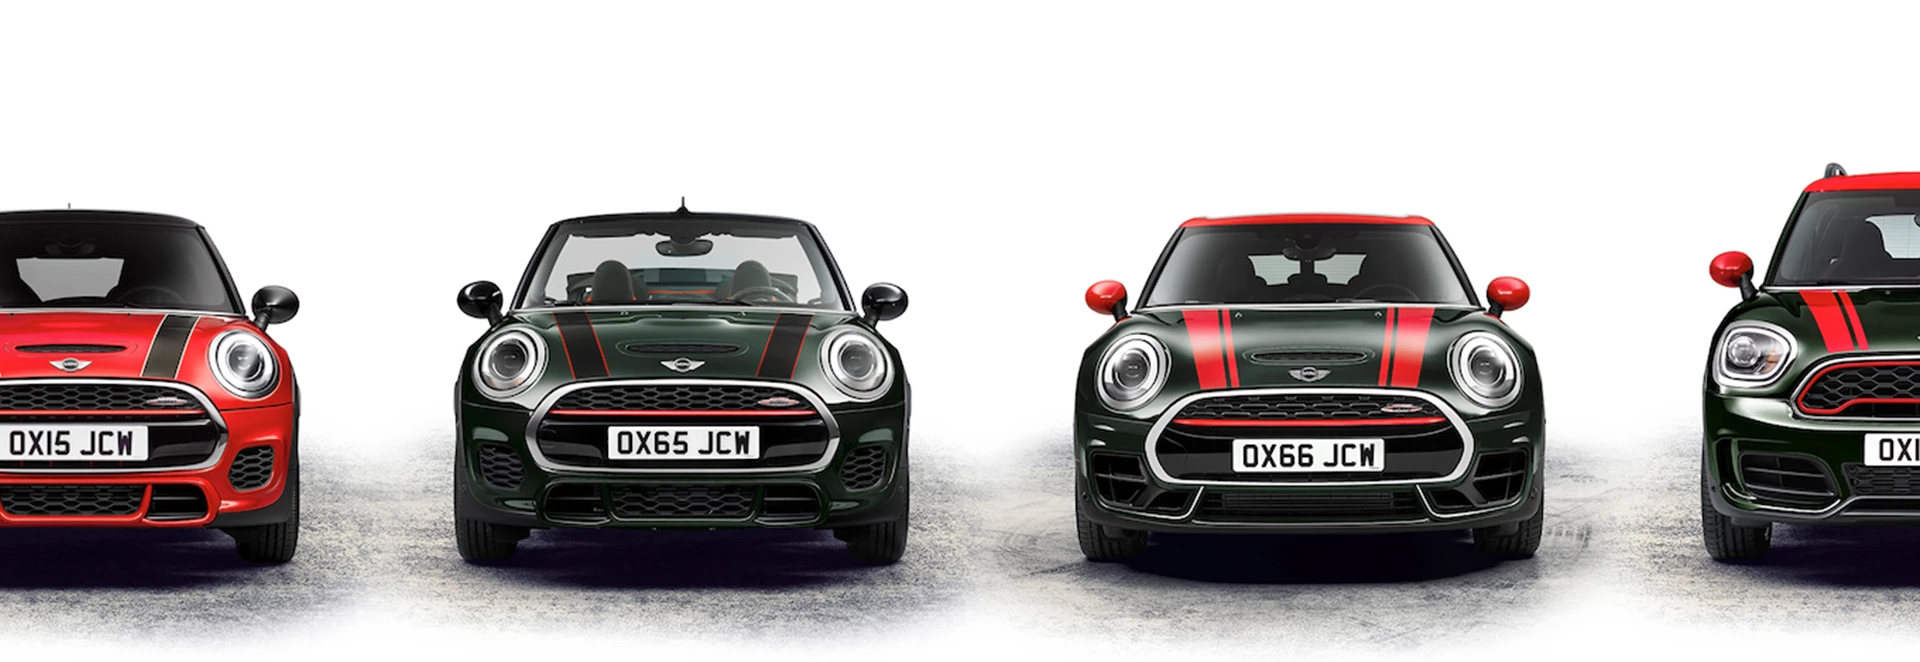 A history of sporty John Cooper Works Minis